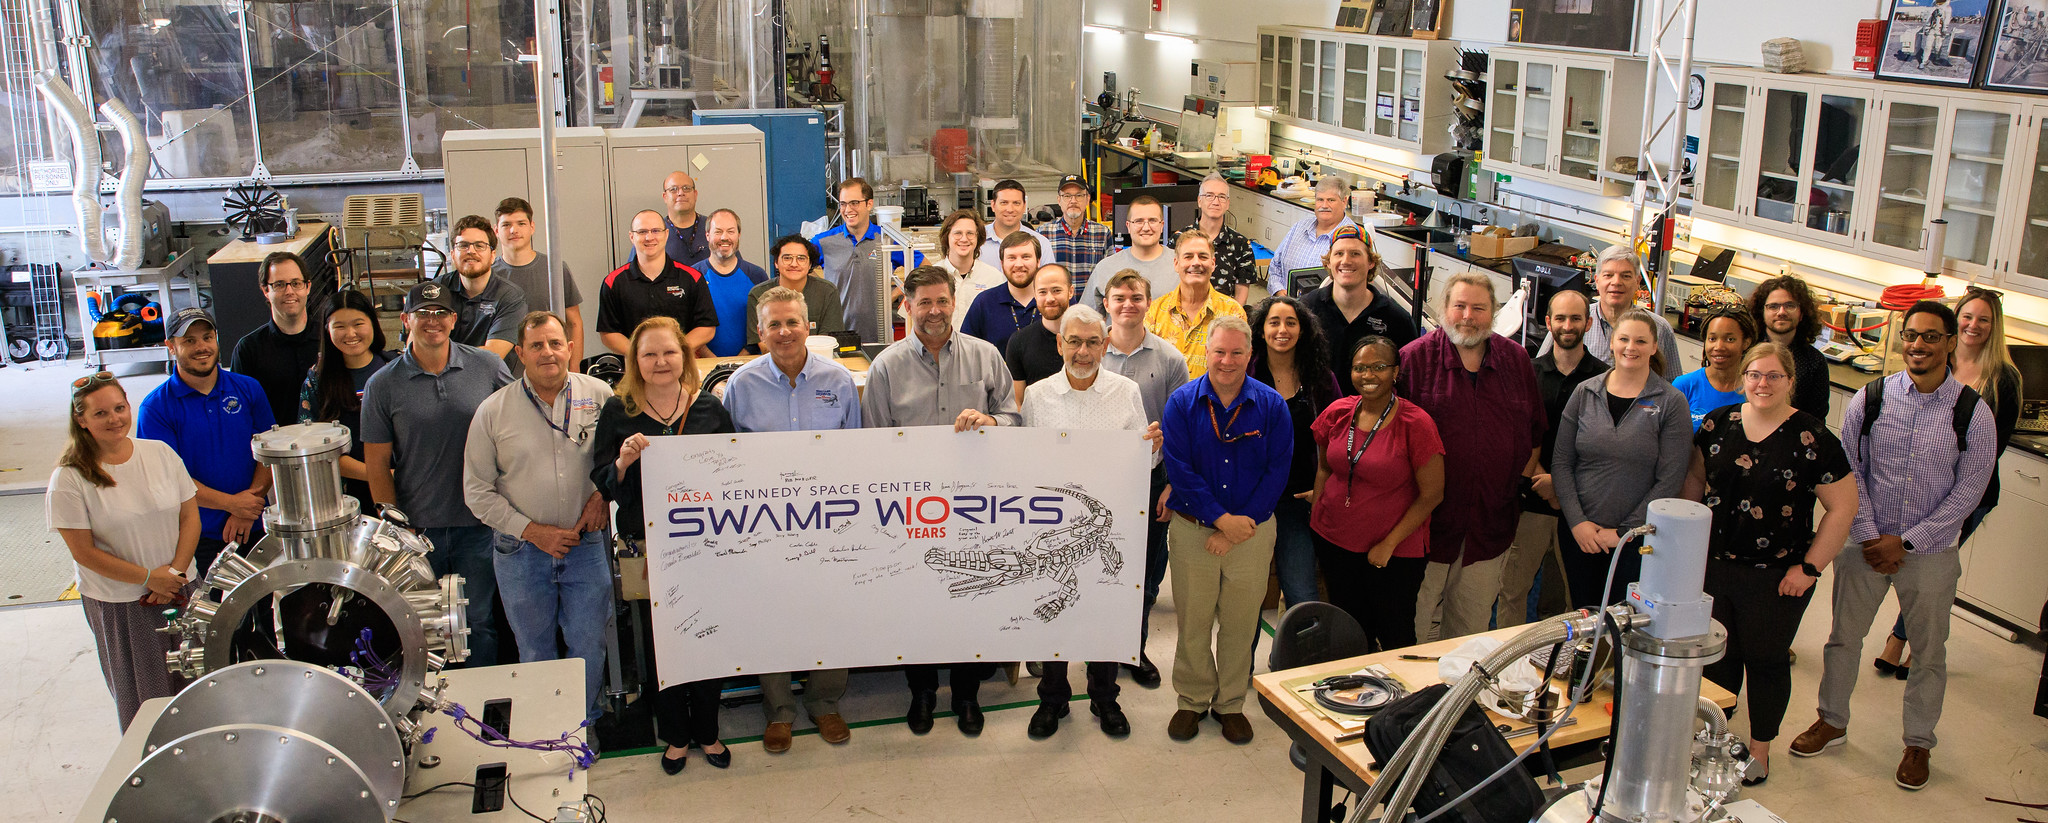 Swamp Works team poses for group photograph inside Swamp Works laboratory area at NASA’s Kennedy Space Center, Florida on April 21, 2023